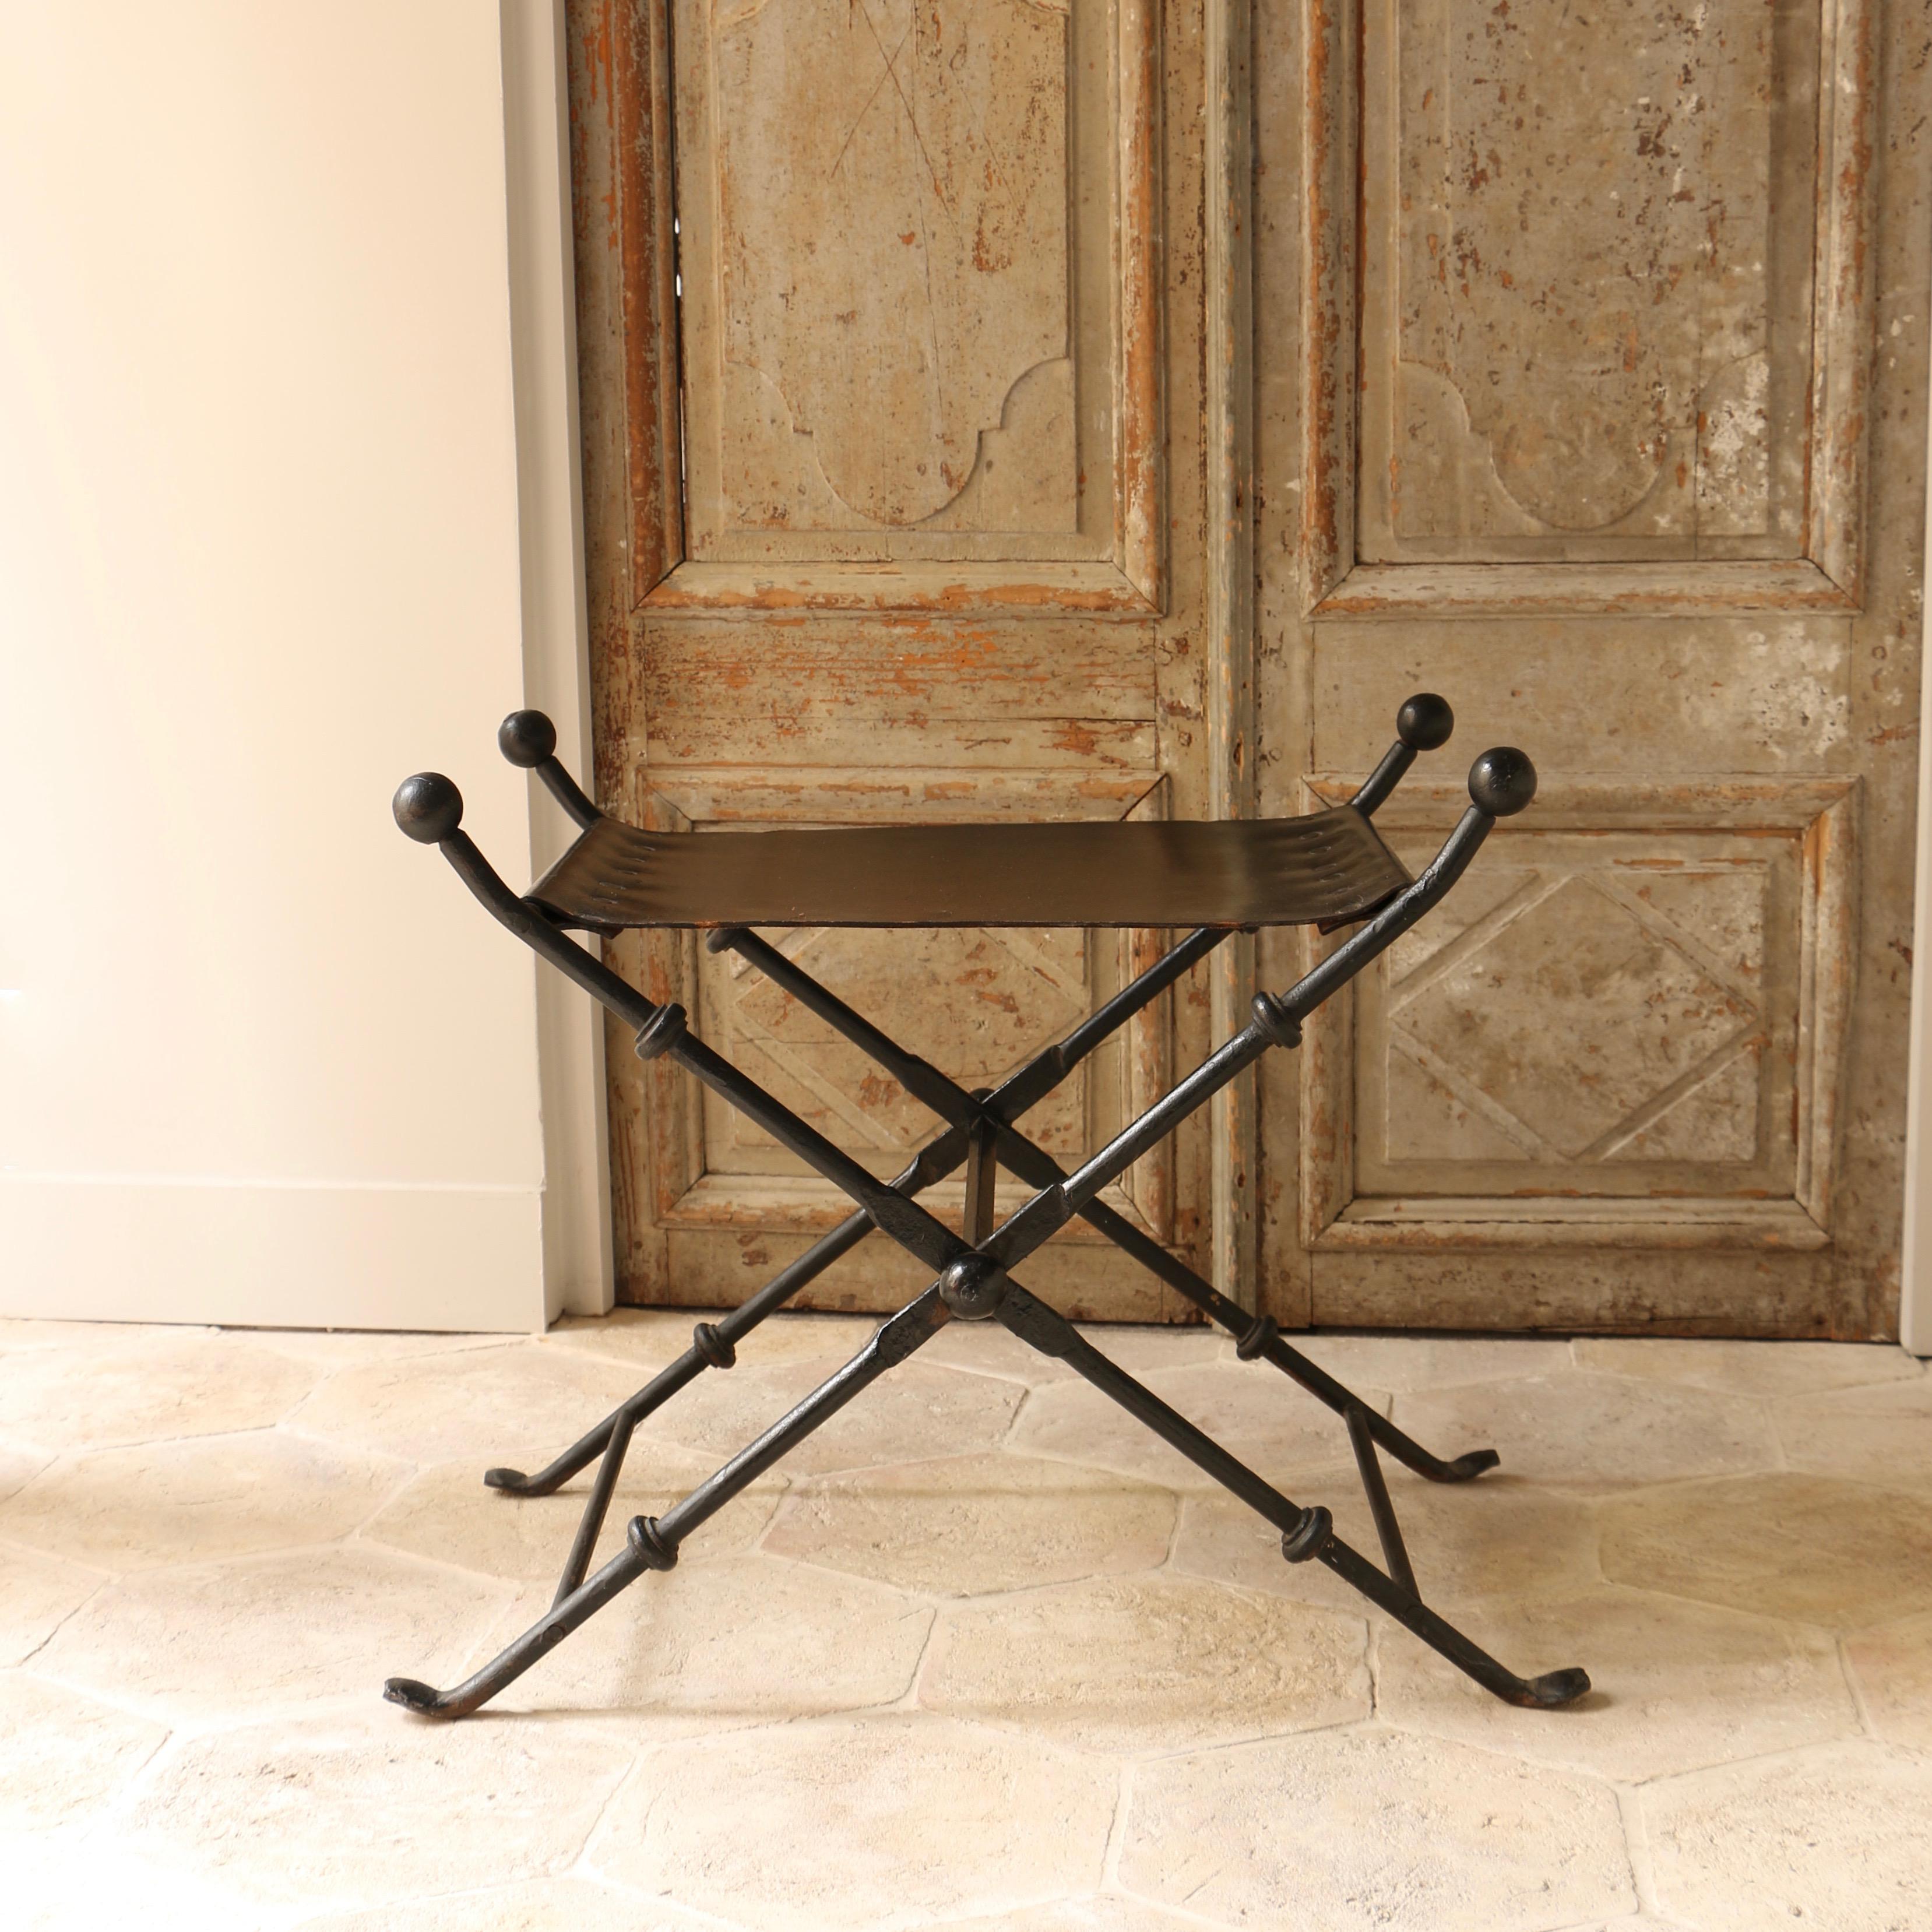 This folding stool, typical of the 1940s, is composed of a bronze structure, and its original studded black leather seat. We like the simple lines of this stool which constitutes a very graphic whole, located halfway between modernity and charm of